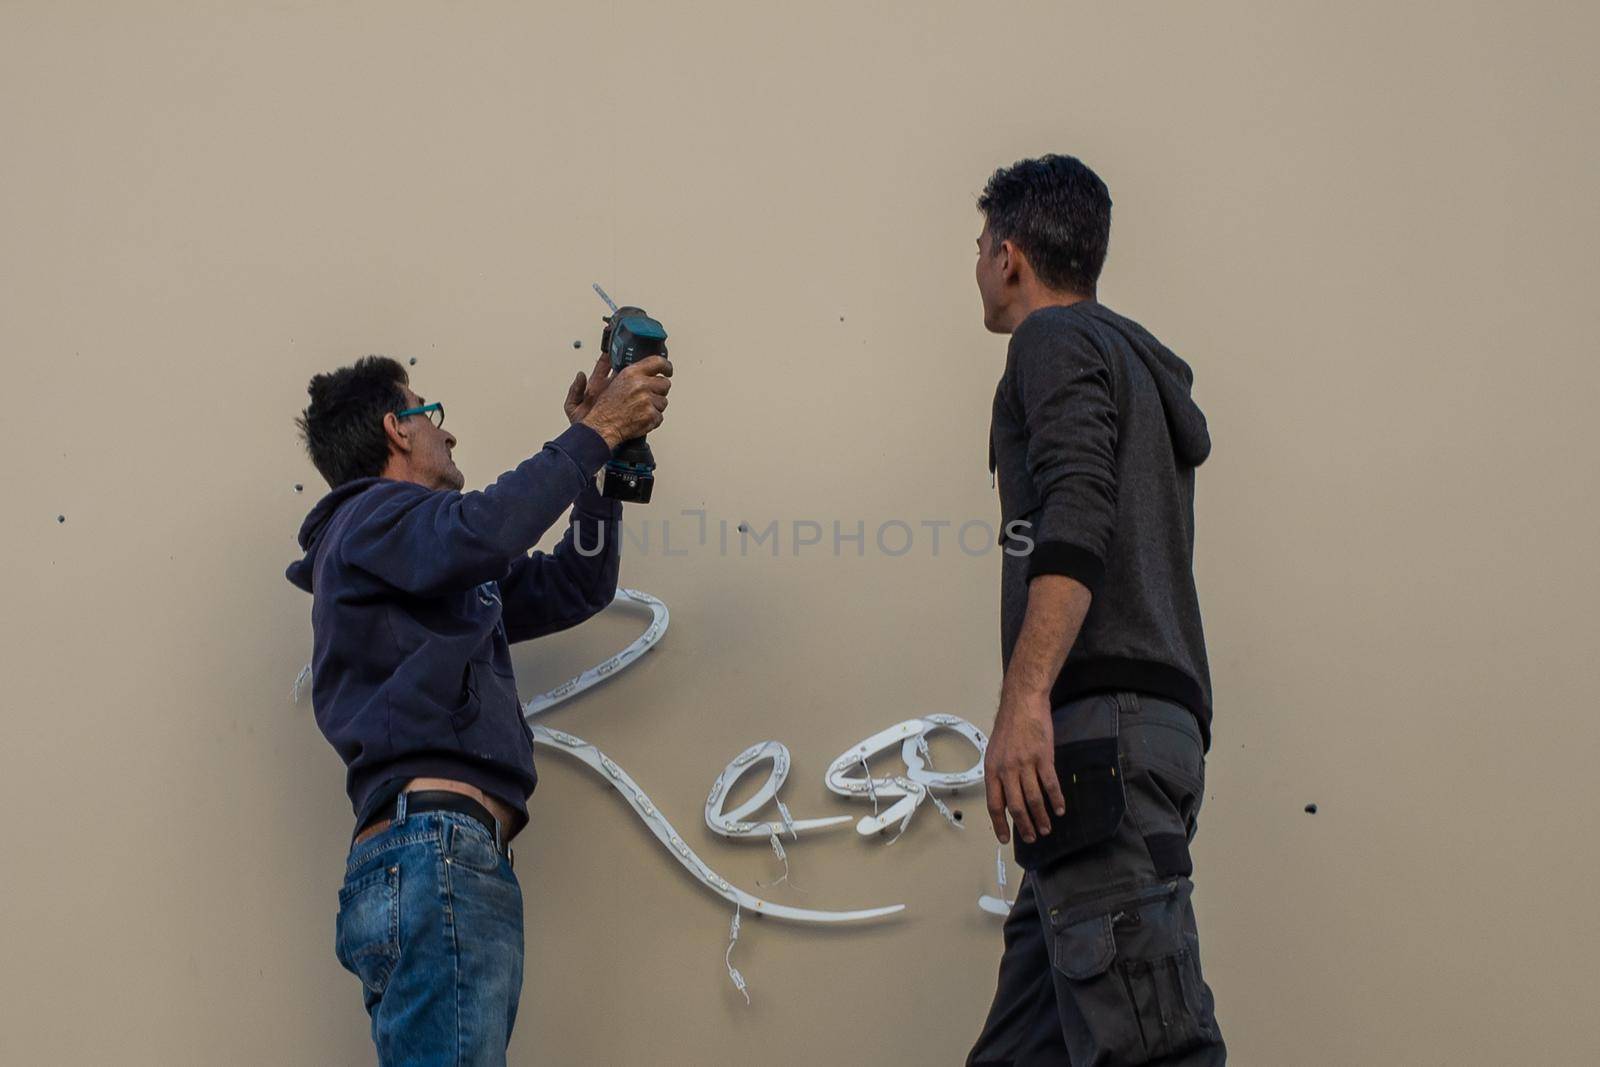 April 22, 2019, Limassol, Cyprus. Two workers are installing a cafe sign on a street in the city of Limassol.